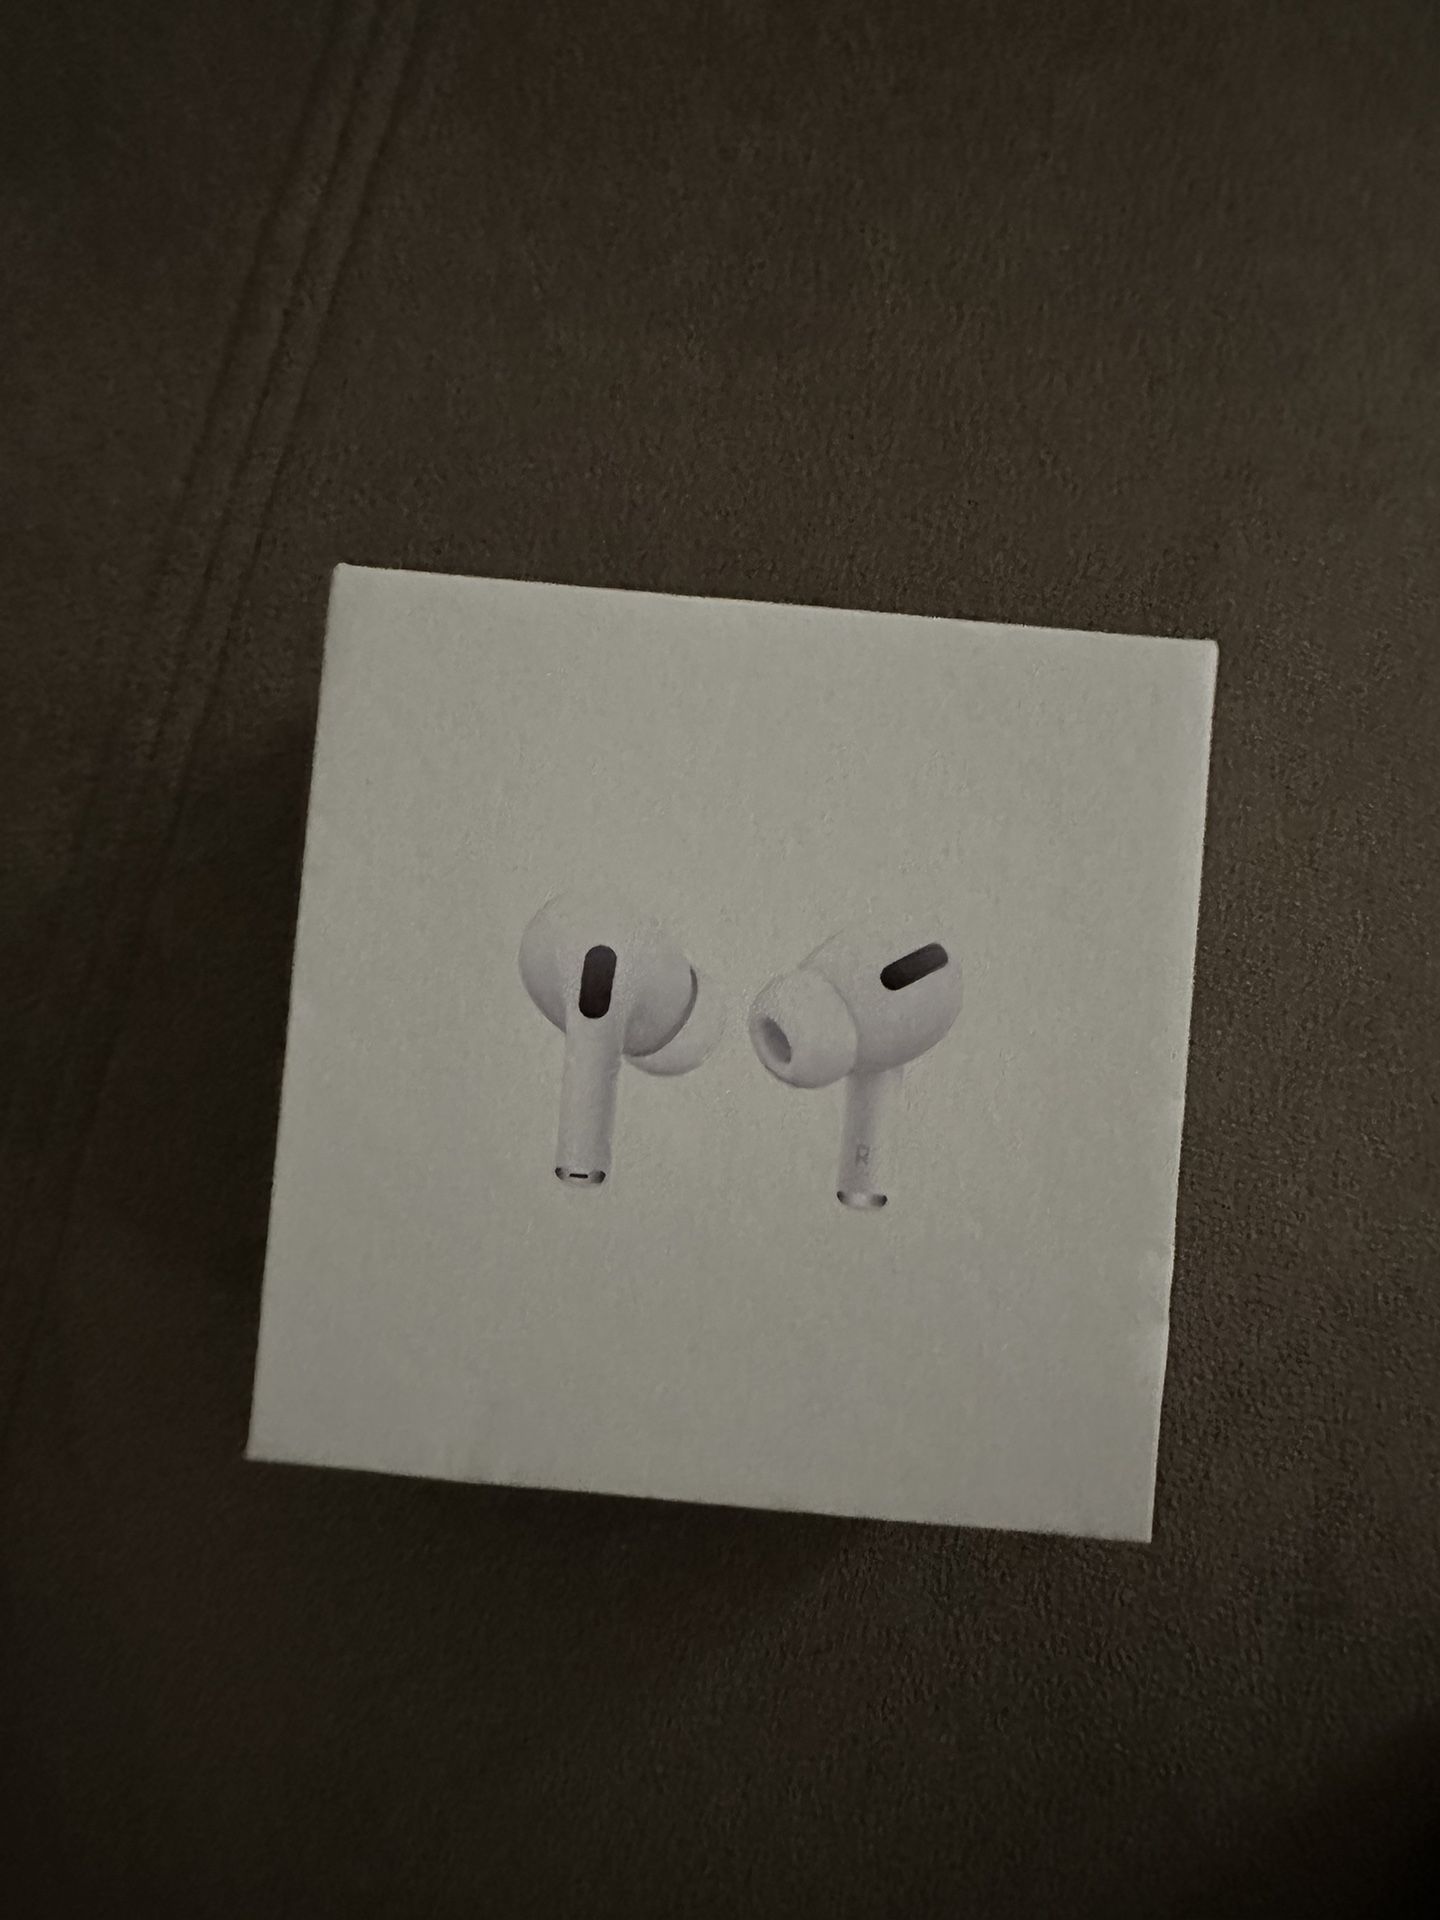 Apple AirPods Pro’s w/ Charger 